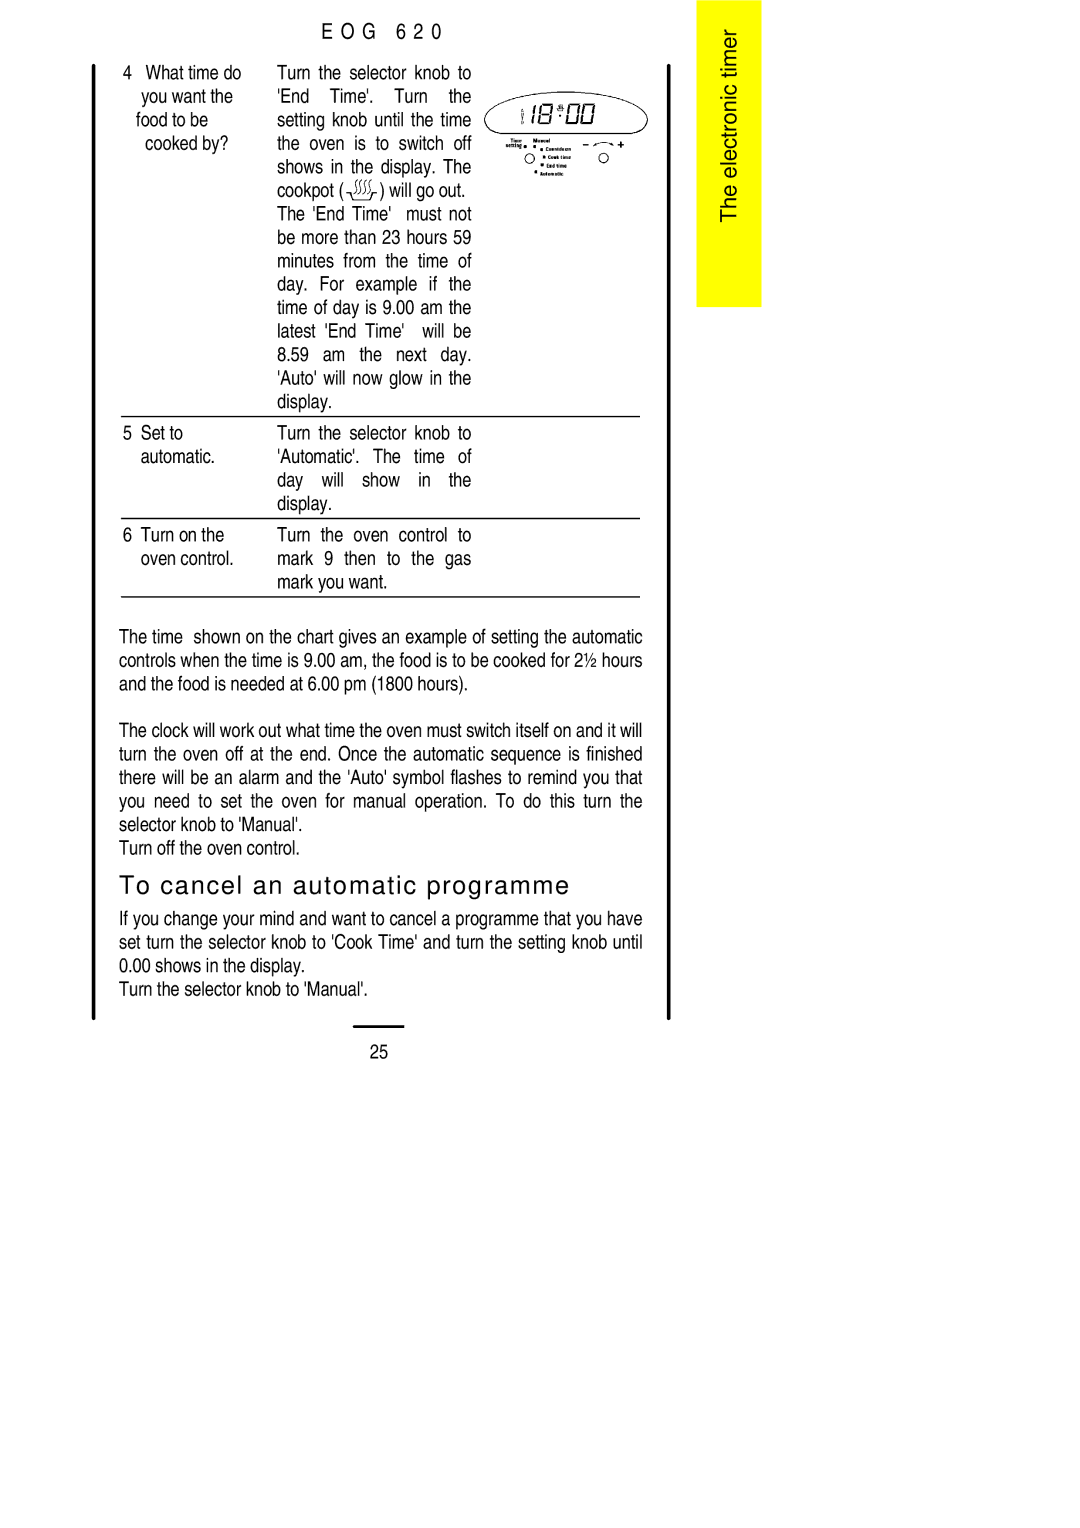 Electrolux EOG 620 manual To cancel an automatic programme 